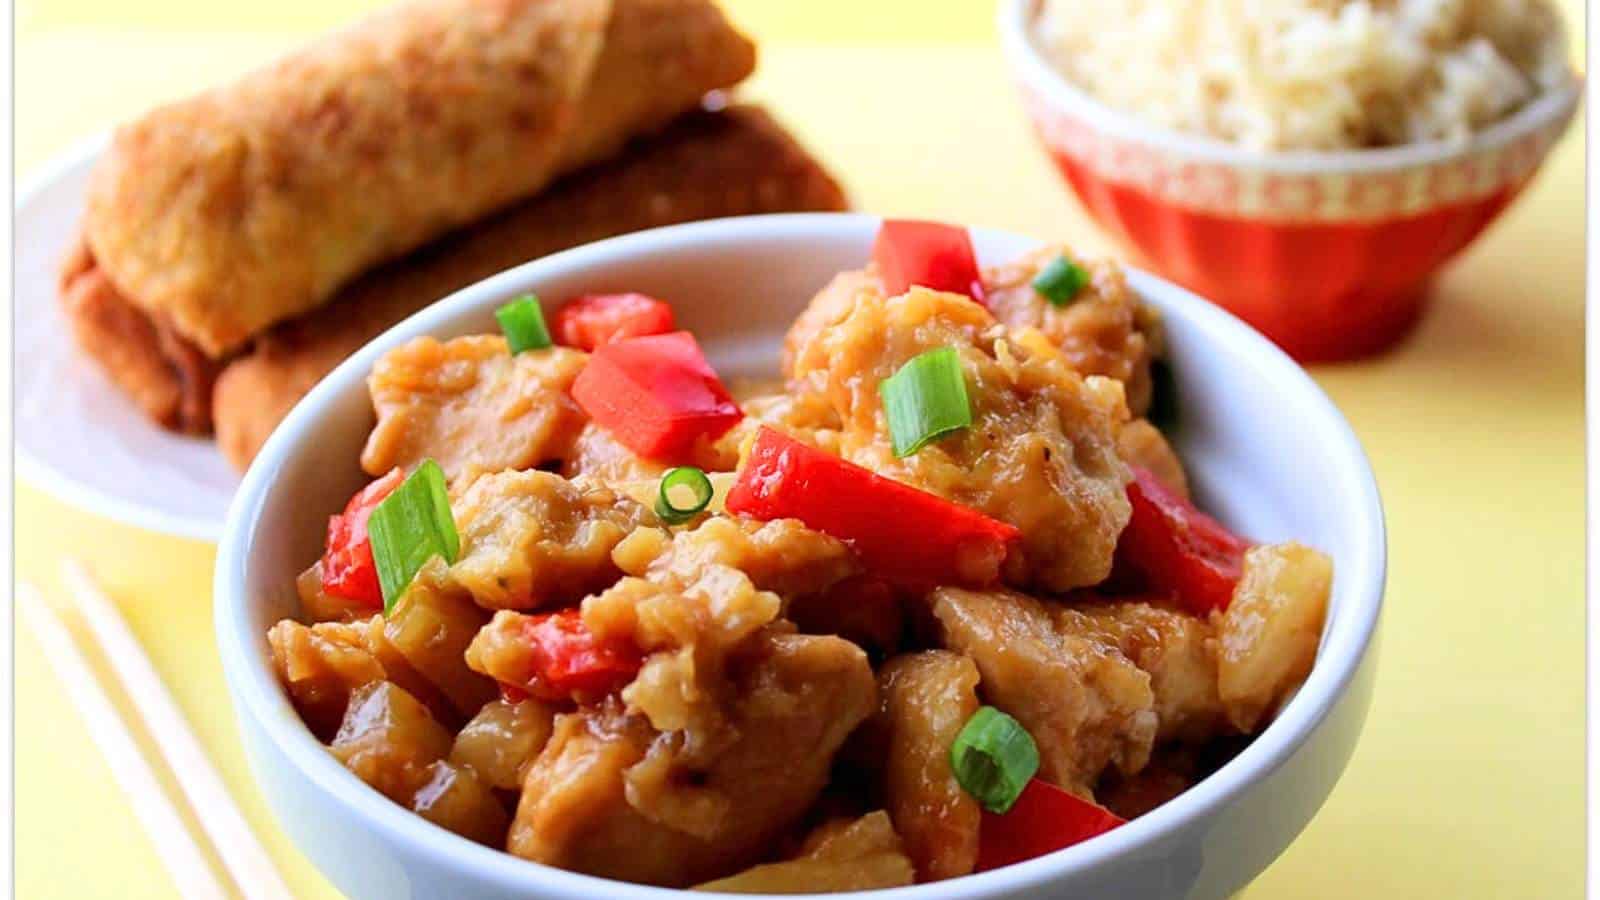 A bowl of sweet and sour chicken with red bell peppers, garnished with green onions, accompanied by a spring roll and a small bowl of rice.